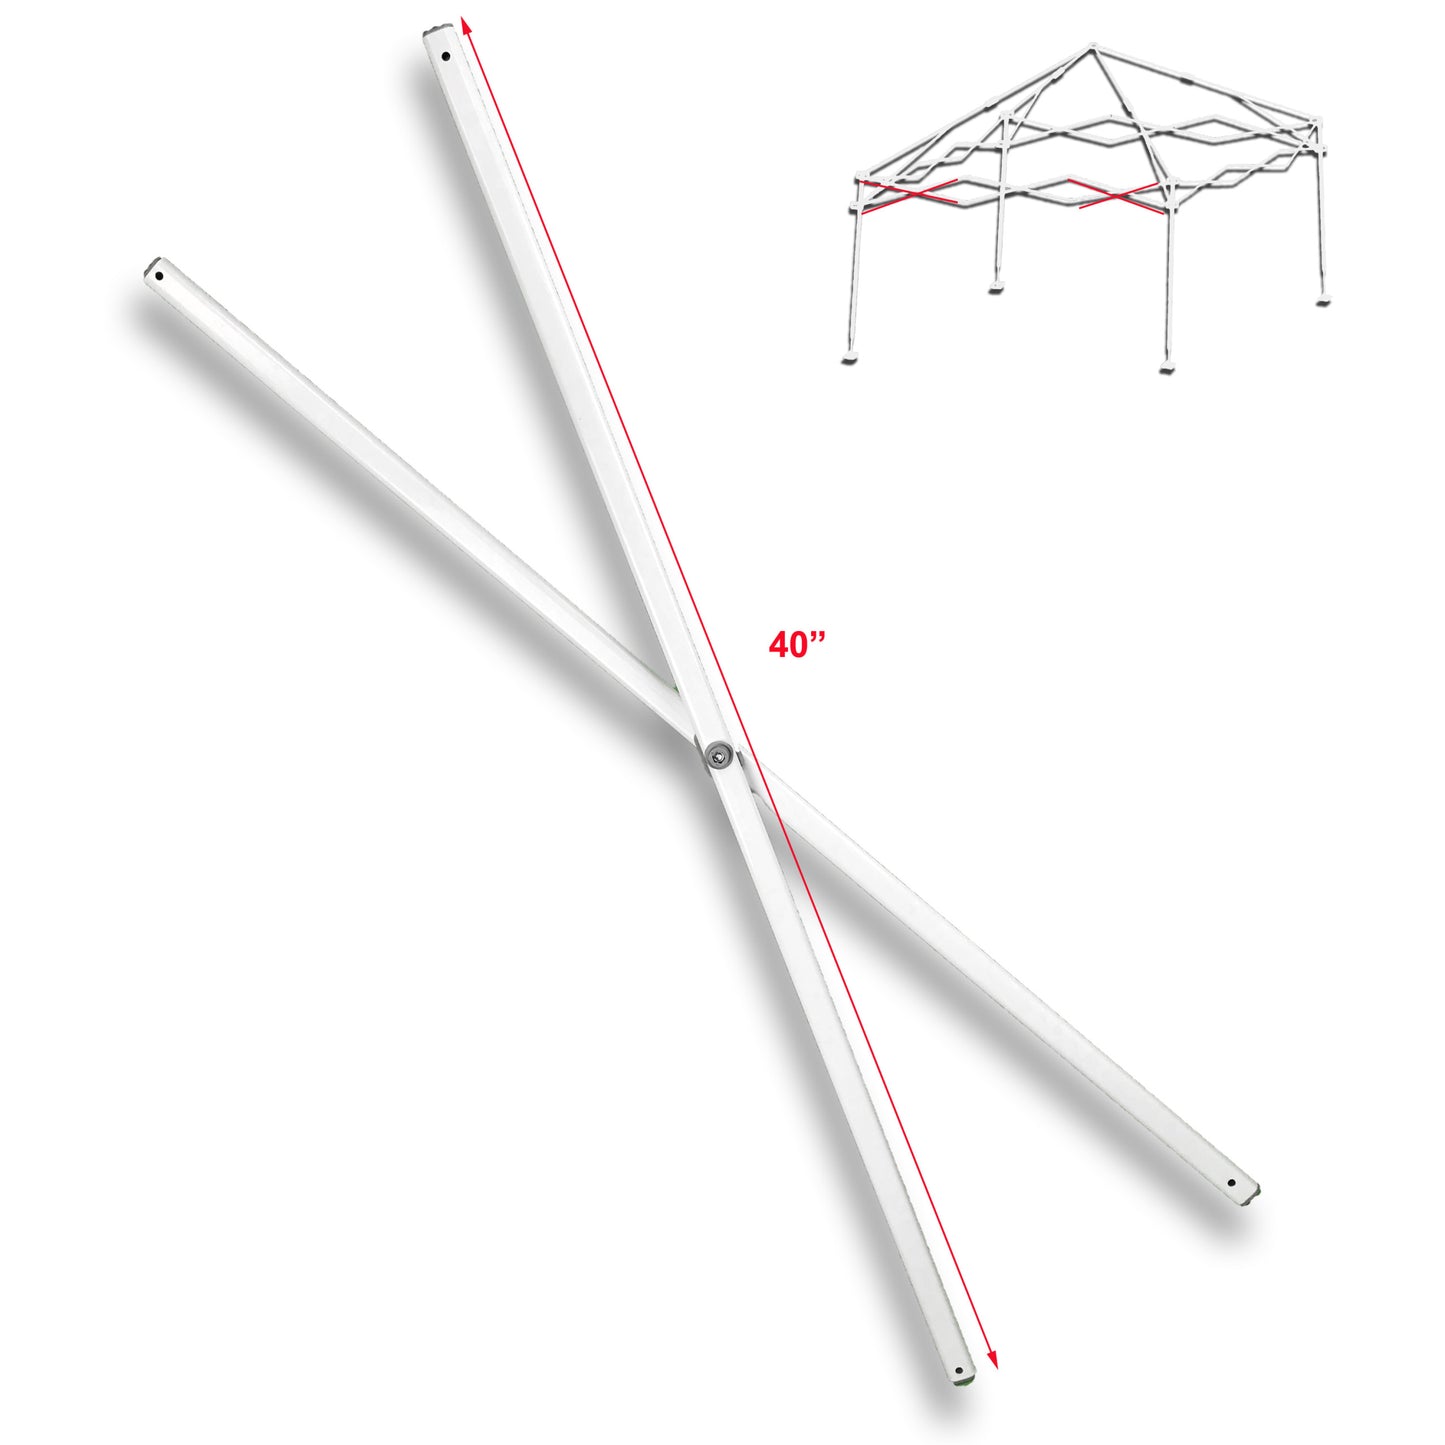 This photo depicts a set of two white cross bars, which are E-Z UP Envoy 10' X 10' Instant Canopy Gazebo Side TRUSS Bar Replacement Parts. The dimensions, as indicated in the photo, measure 40 inches in length. Furthermore, it's highlighted that the distance from the edge to the center on both sides is consistent, measuring 20 inches on each side. In the background, a frame is visible, marked in red to indicate where these spare parts are located within the canopy structure.